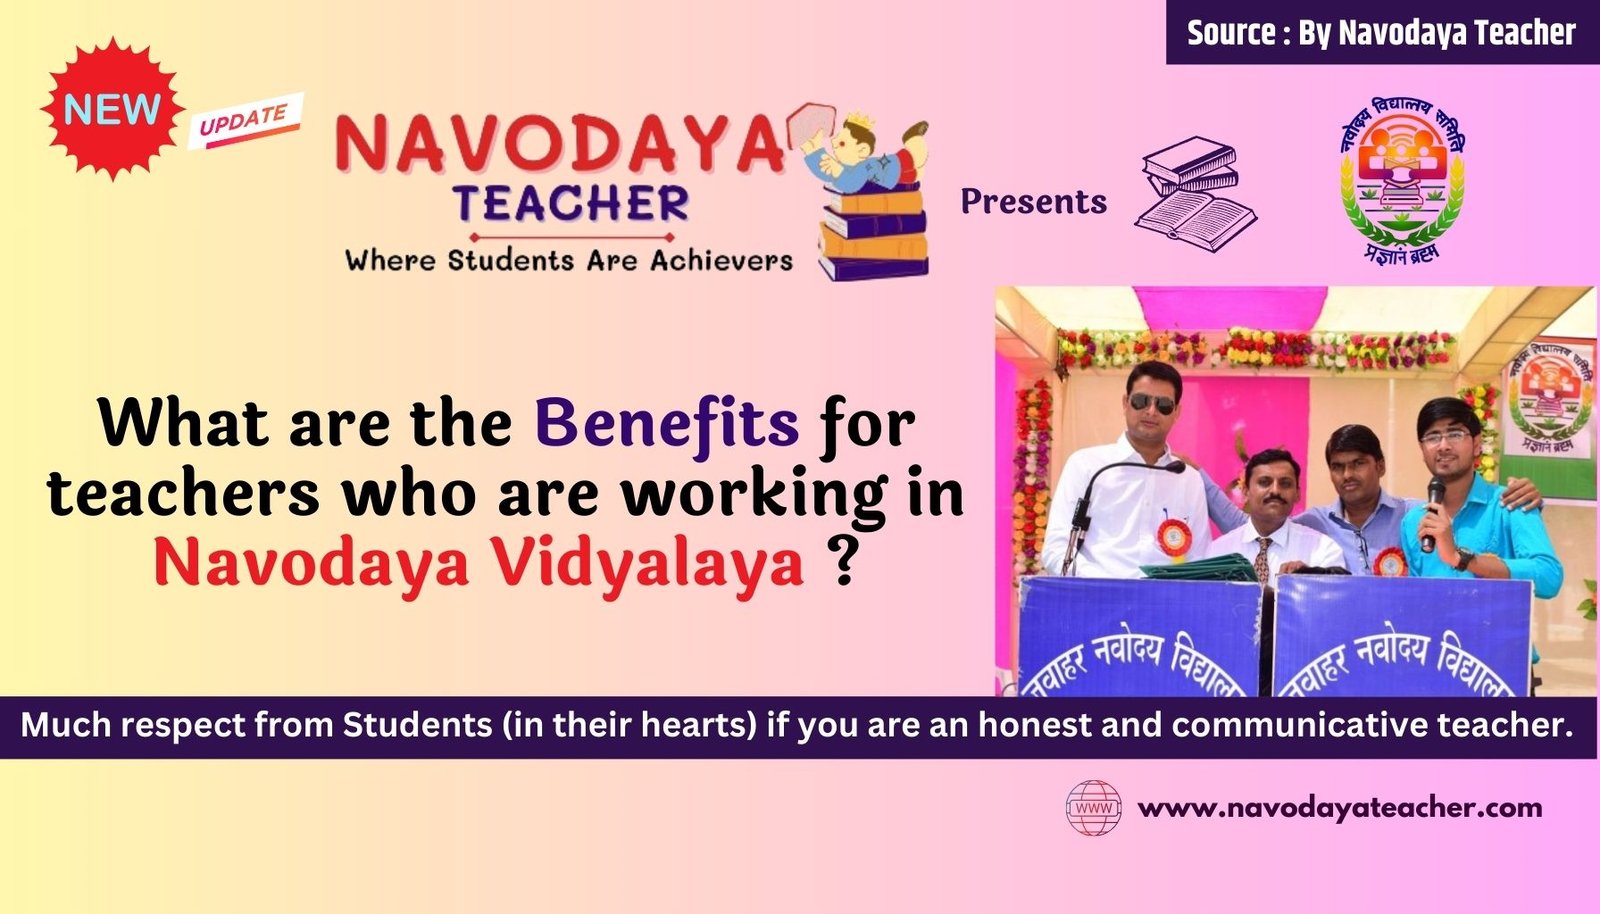 What are the Benefits for teachers who are working in Navodaya Vidyalaya